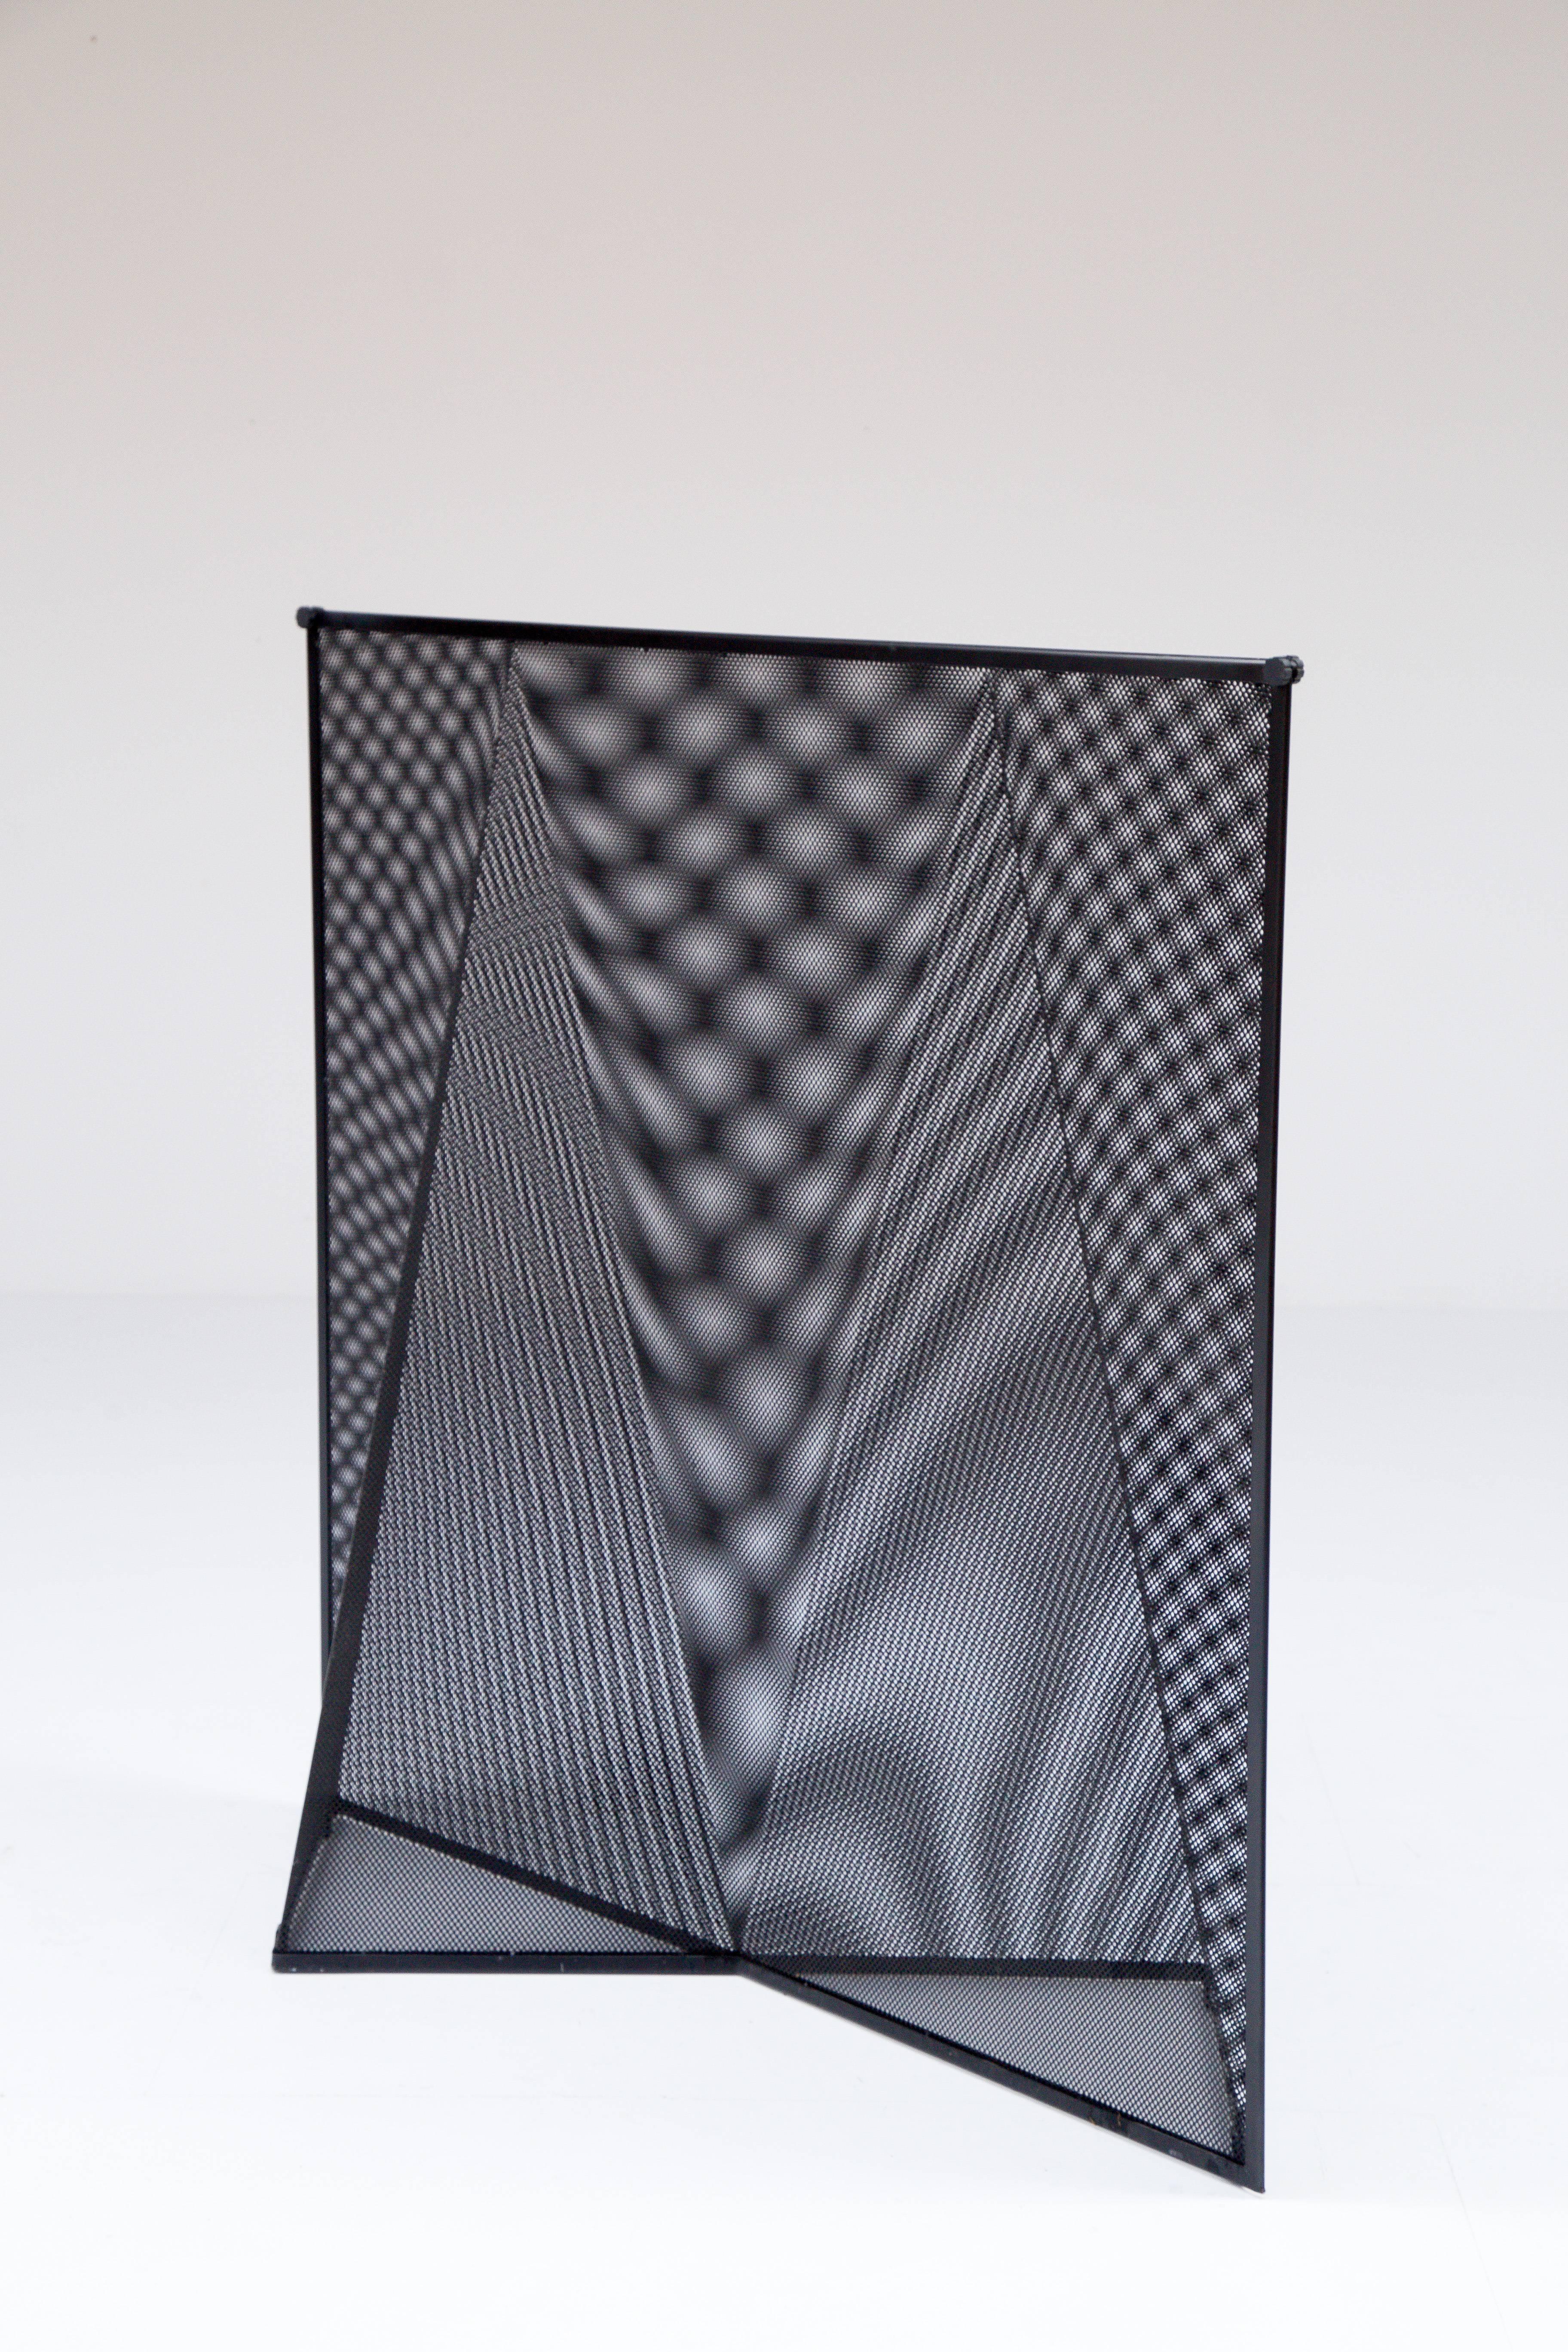 The Nilla Rosa screen designed in 1990s by Swiss architect Mario Botta and produced by Alias, Italy. Perforated and stretched steel frames enameled in black creating an Op-art effect due to the juxtaposition of the frames.